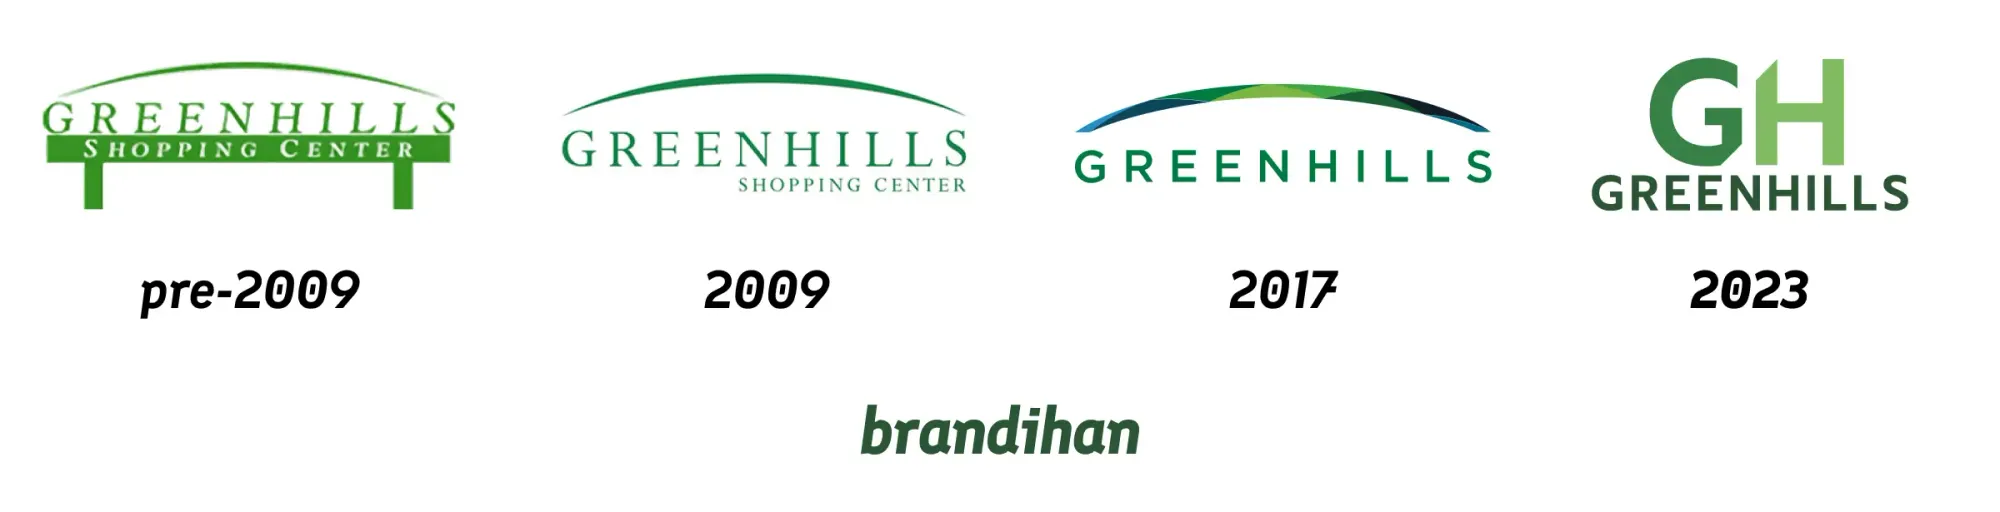 Greenhills (and its new logo) Ditches the Arc